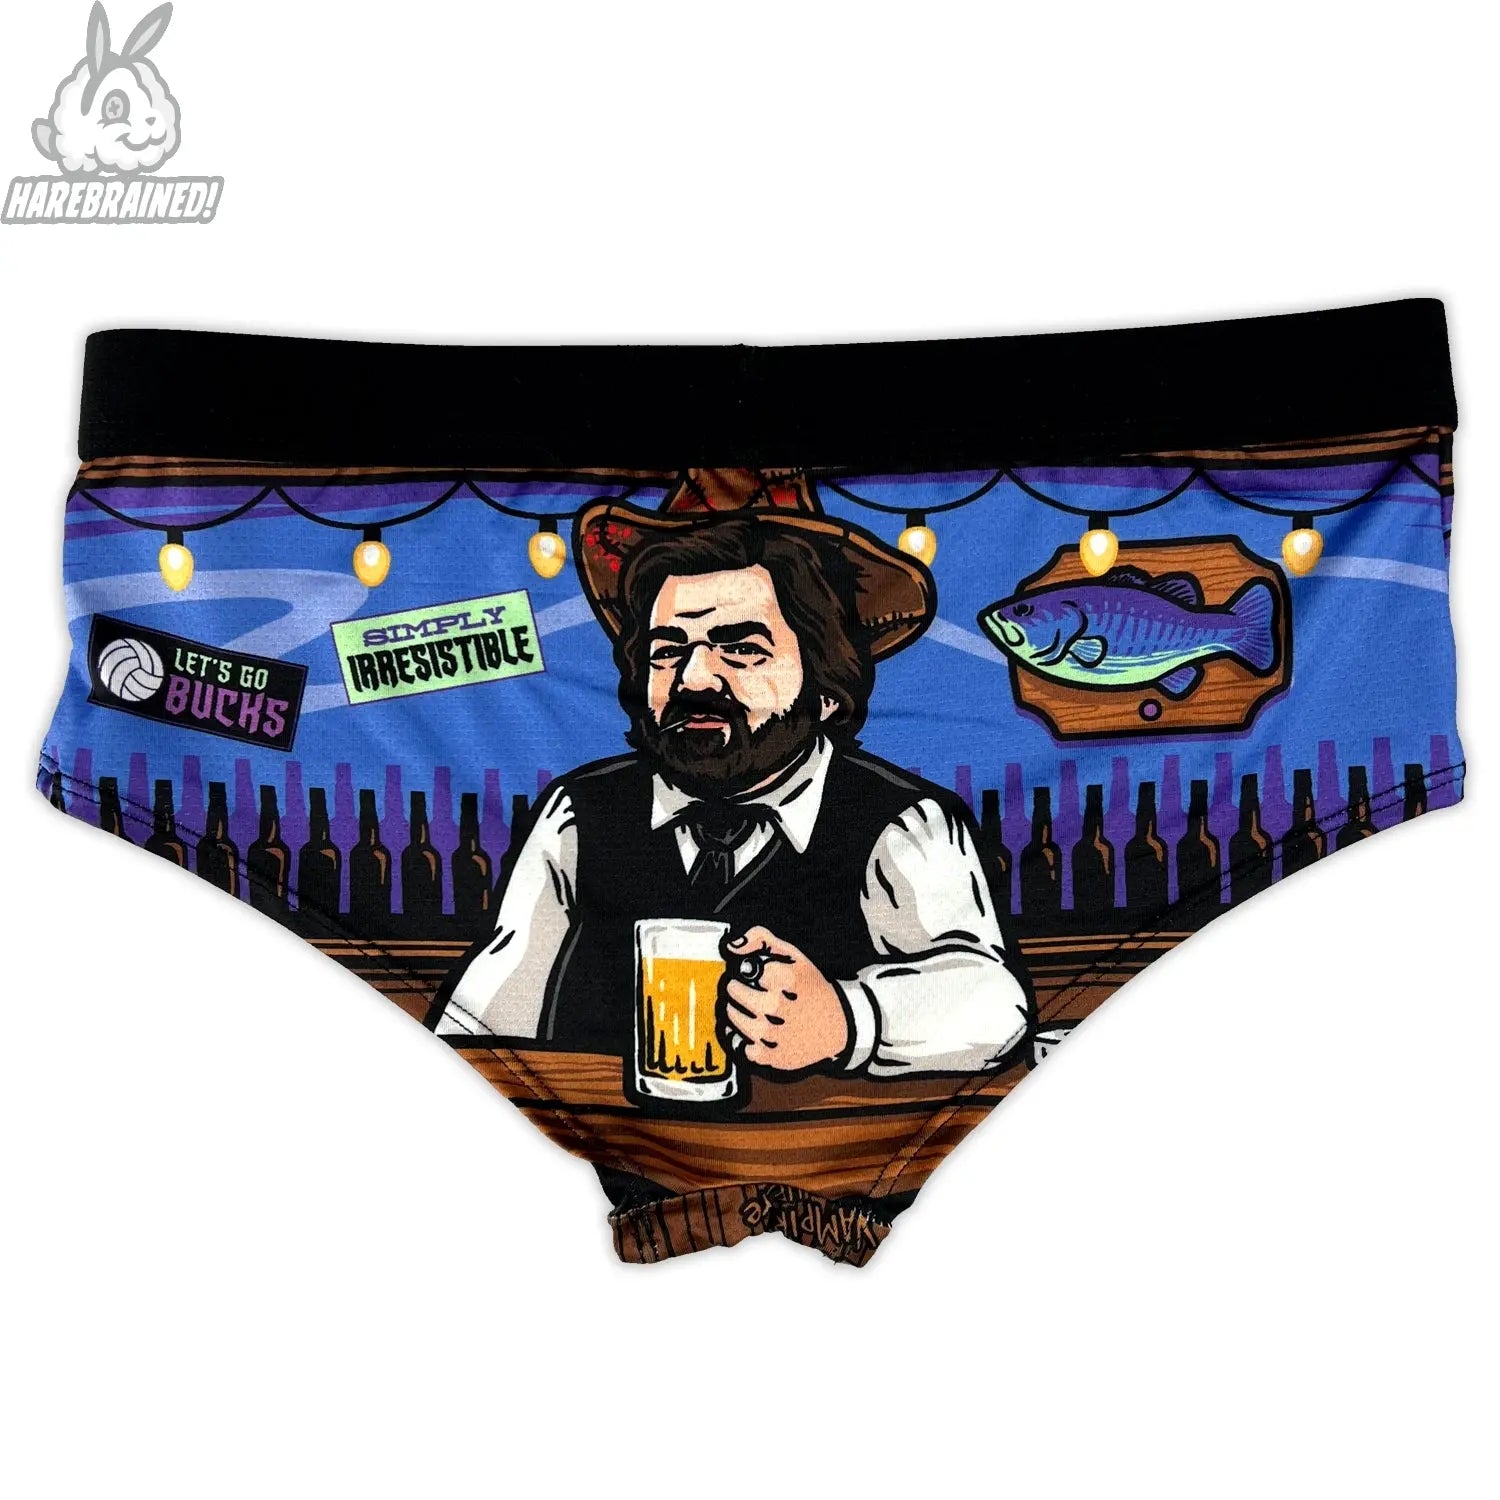 Harebrained, Inventory is getting a little low on our “Wanna Play?” Panties!  Don't miss out on this years hottest undie! (Note to self: make �